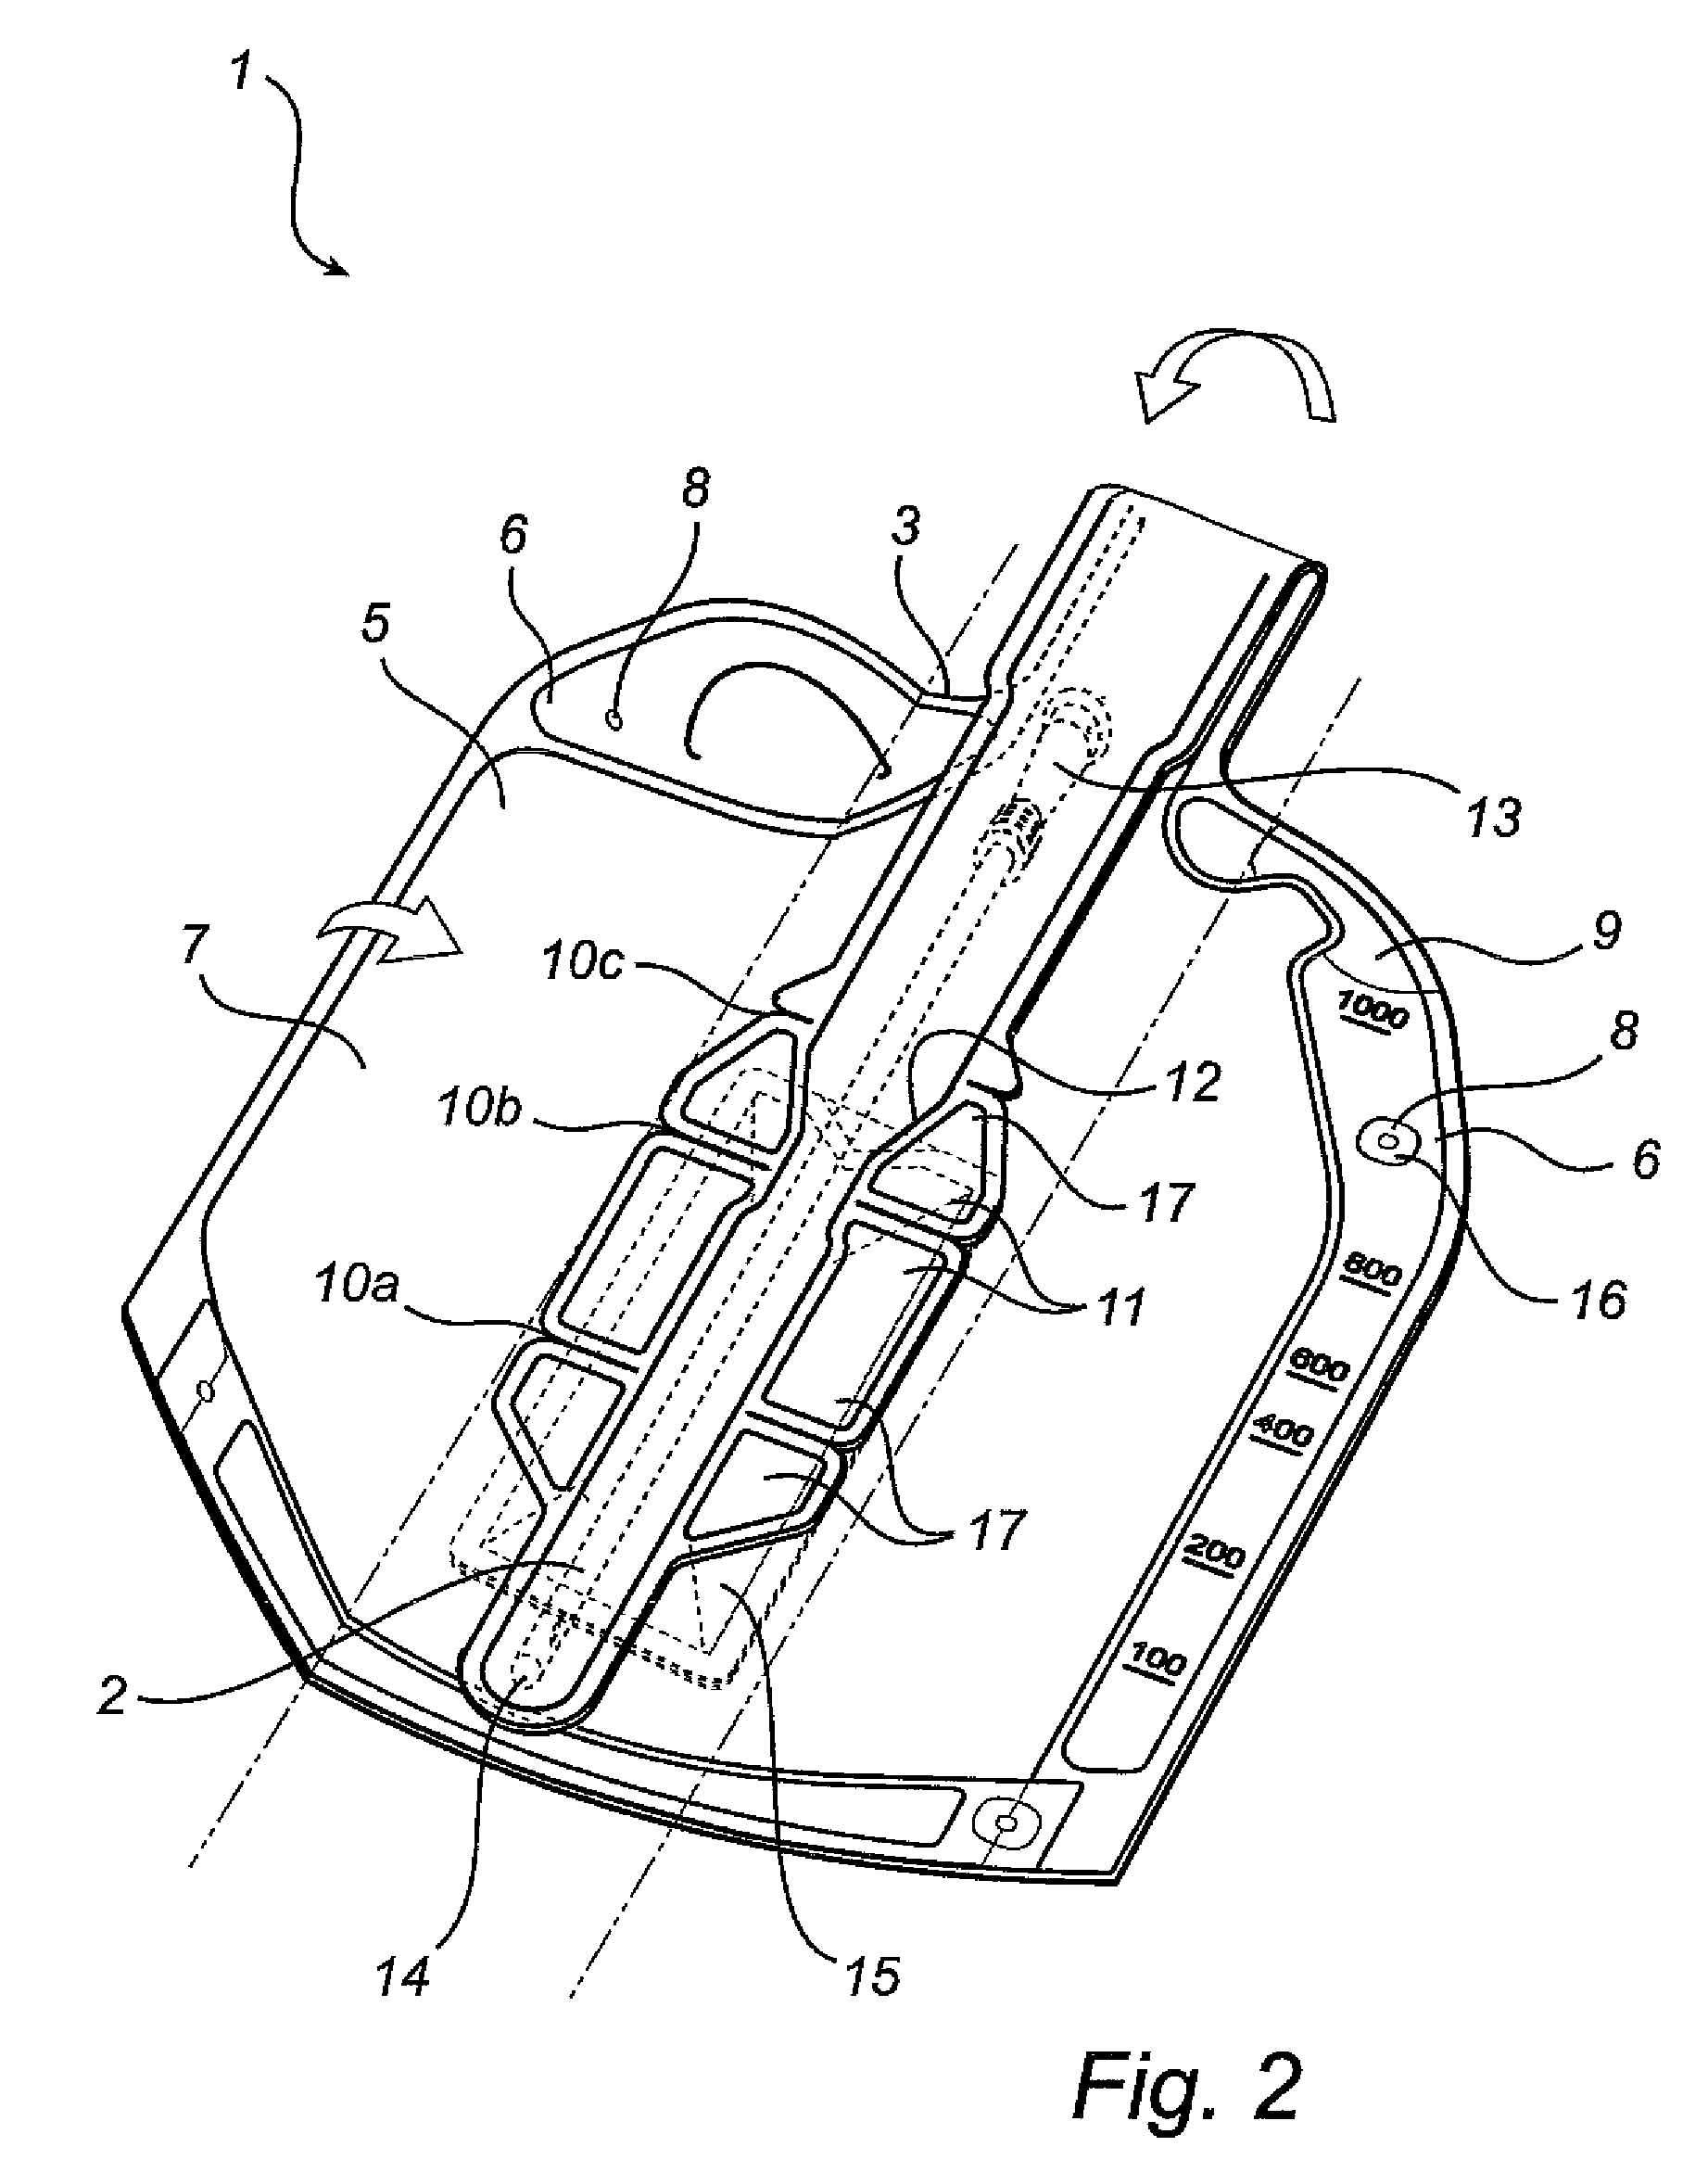 Catheter assembly with a folded urine collection bag